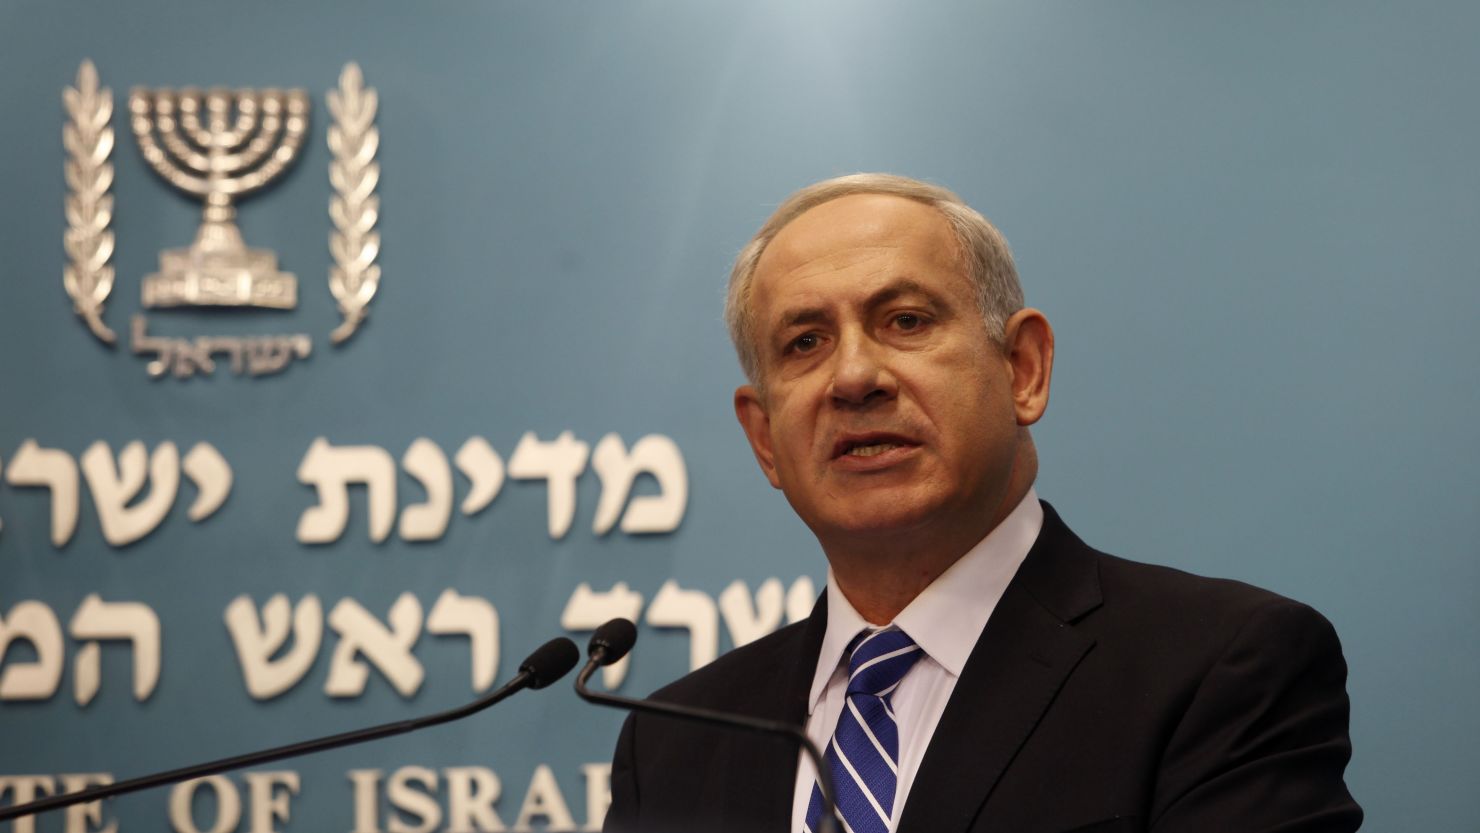 Israeli Prime Minister Benjamin Netanyahu briefs the press on his election announcement in Jerusalem on October 9, 2012.